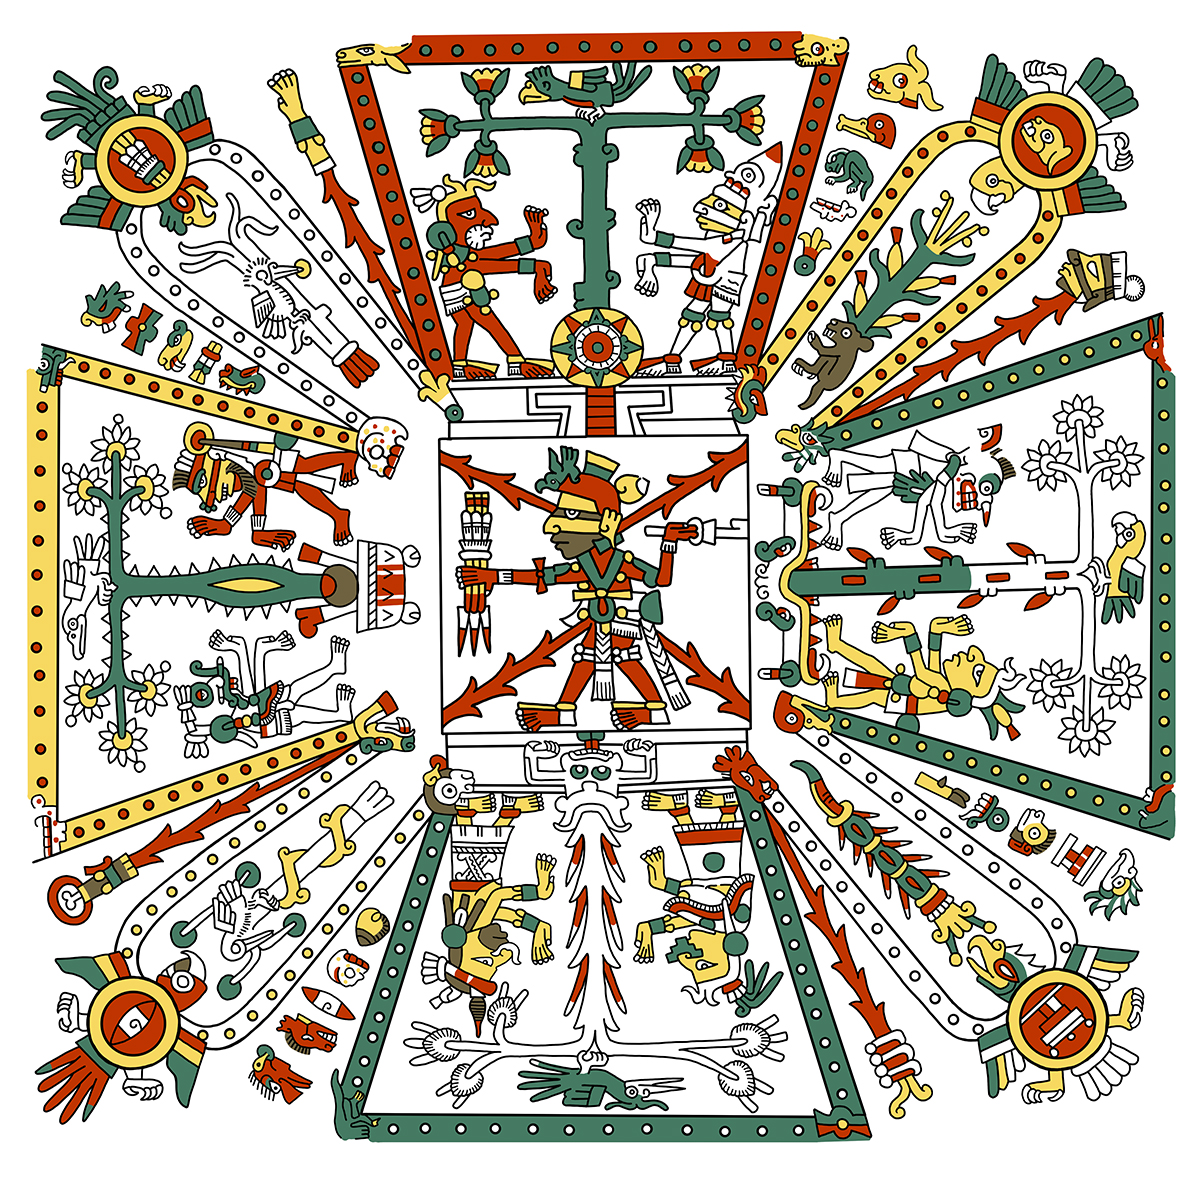 In this depiction of the Mesoamerican cosmos the Aztec Lord of Fire, Xiuhtecuhtli, is wielding an atlatl in one hand and a bundle of spears in the other. Xiuhtecuhtli used his atlatl for various supernatural tasks, such as throwing spears at the sun. (Image courtesy of Boyd 2016)